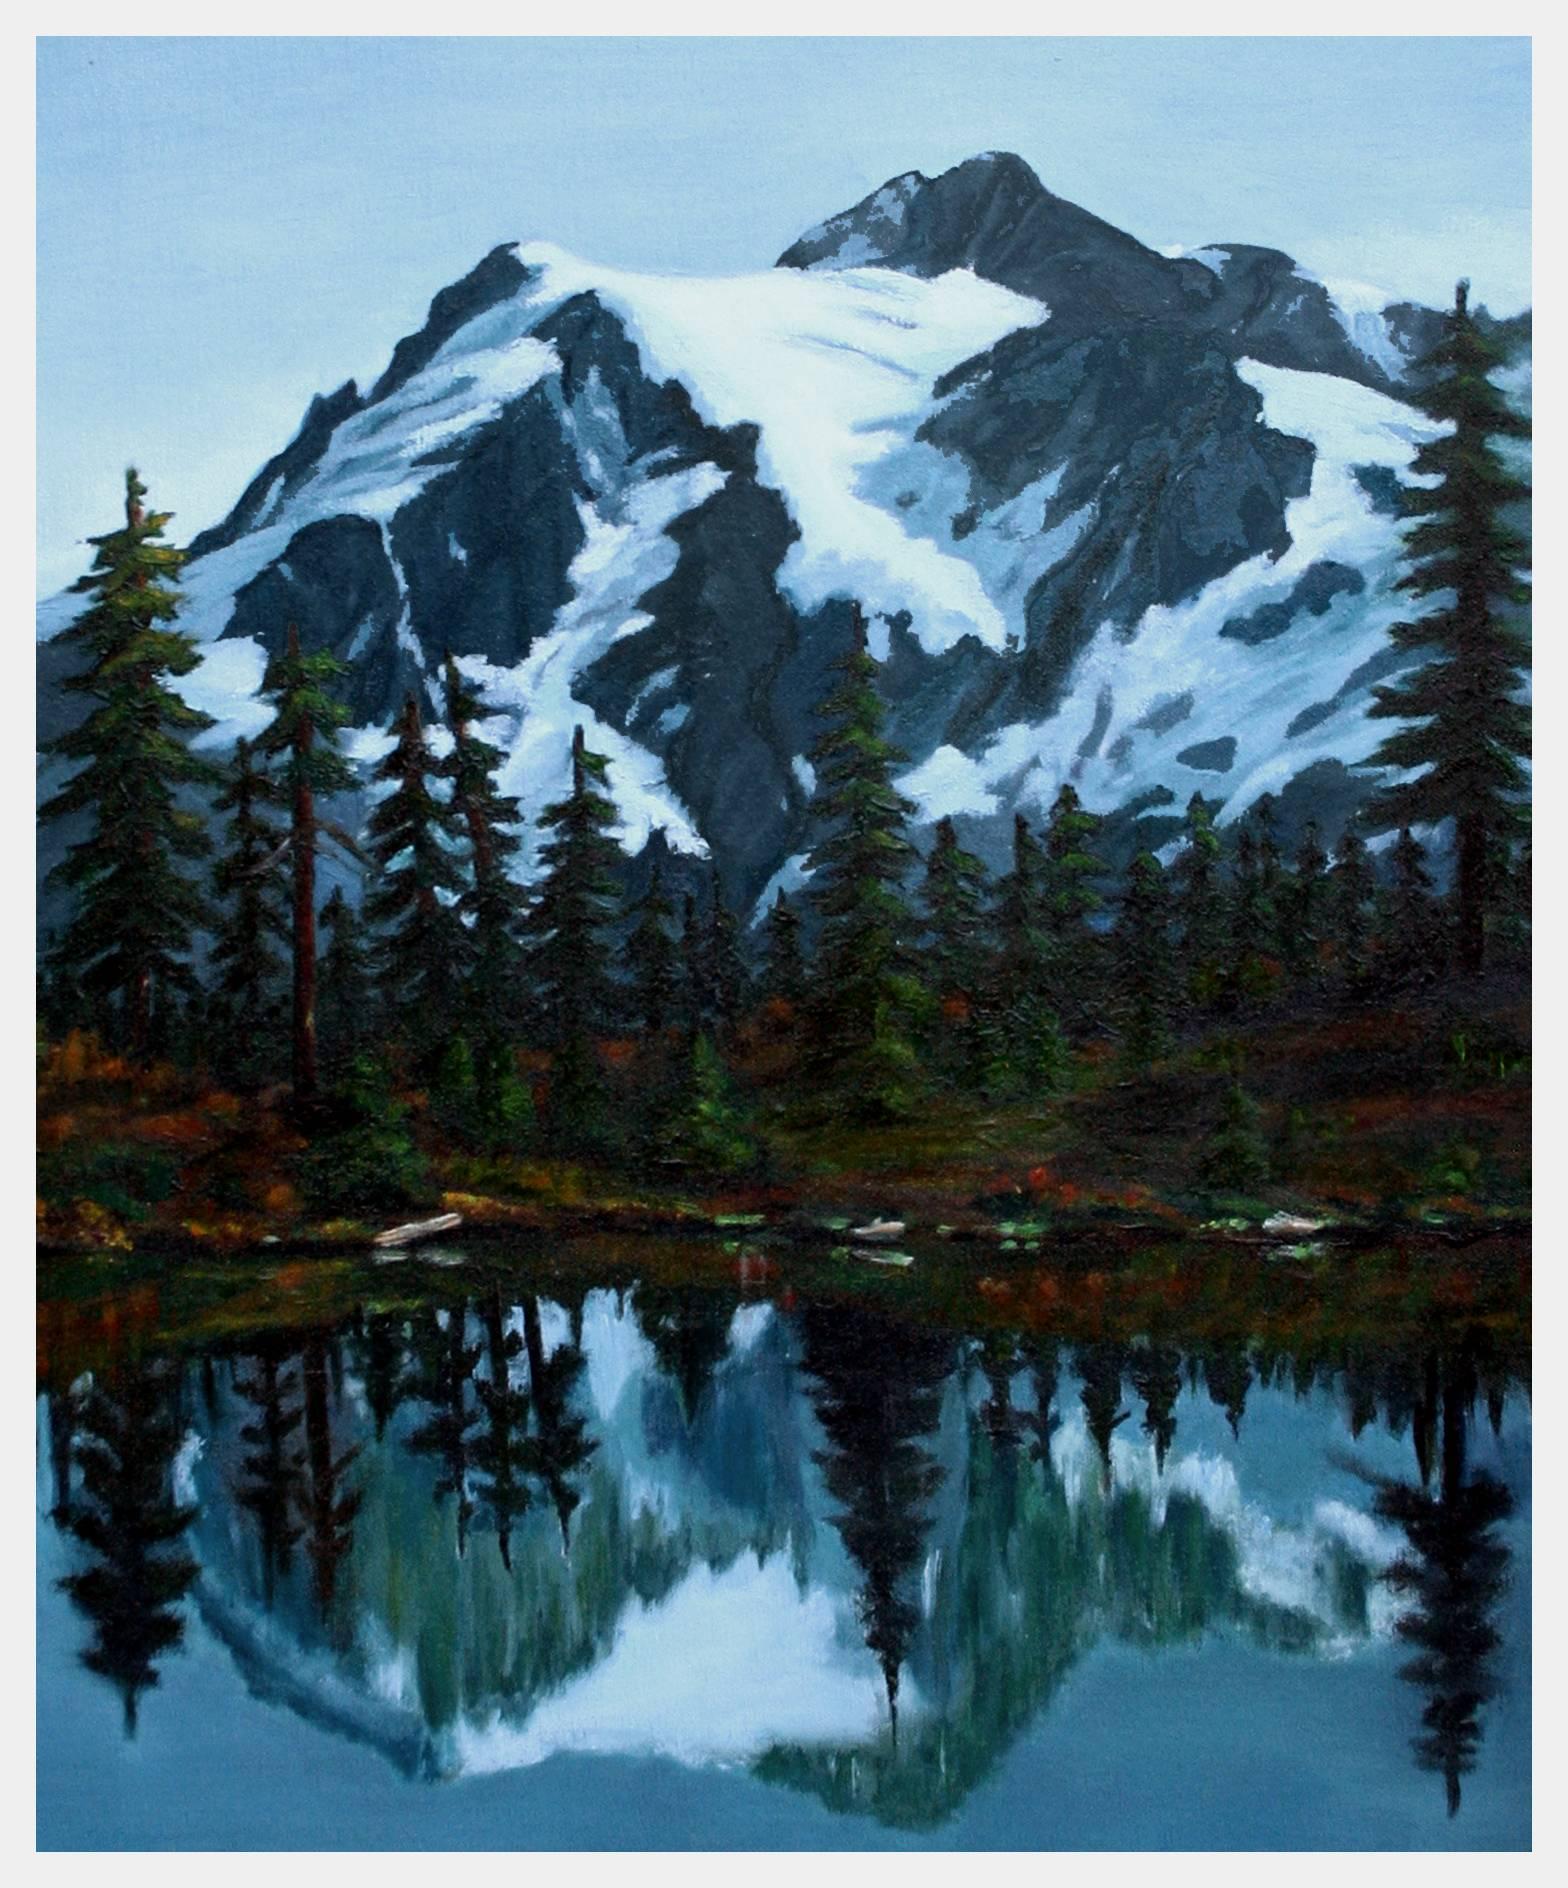 Snow Capped Mountain Reflections Landscape - Painting by Evalyn Clark